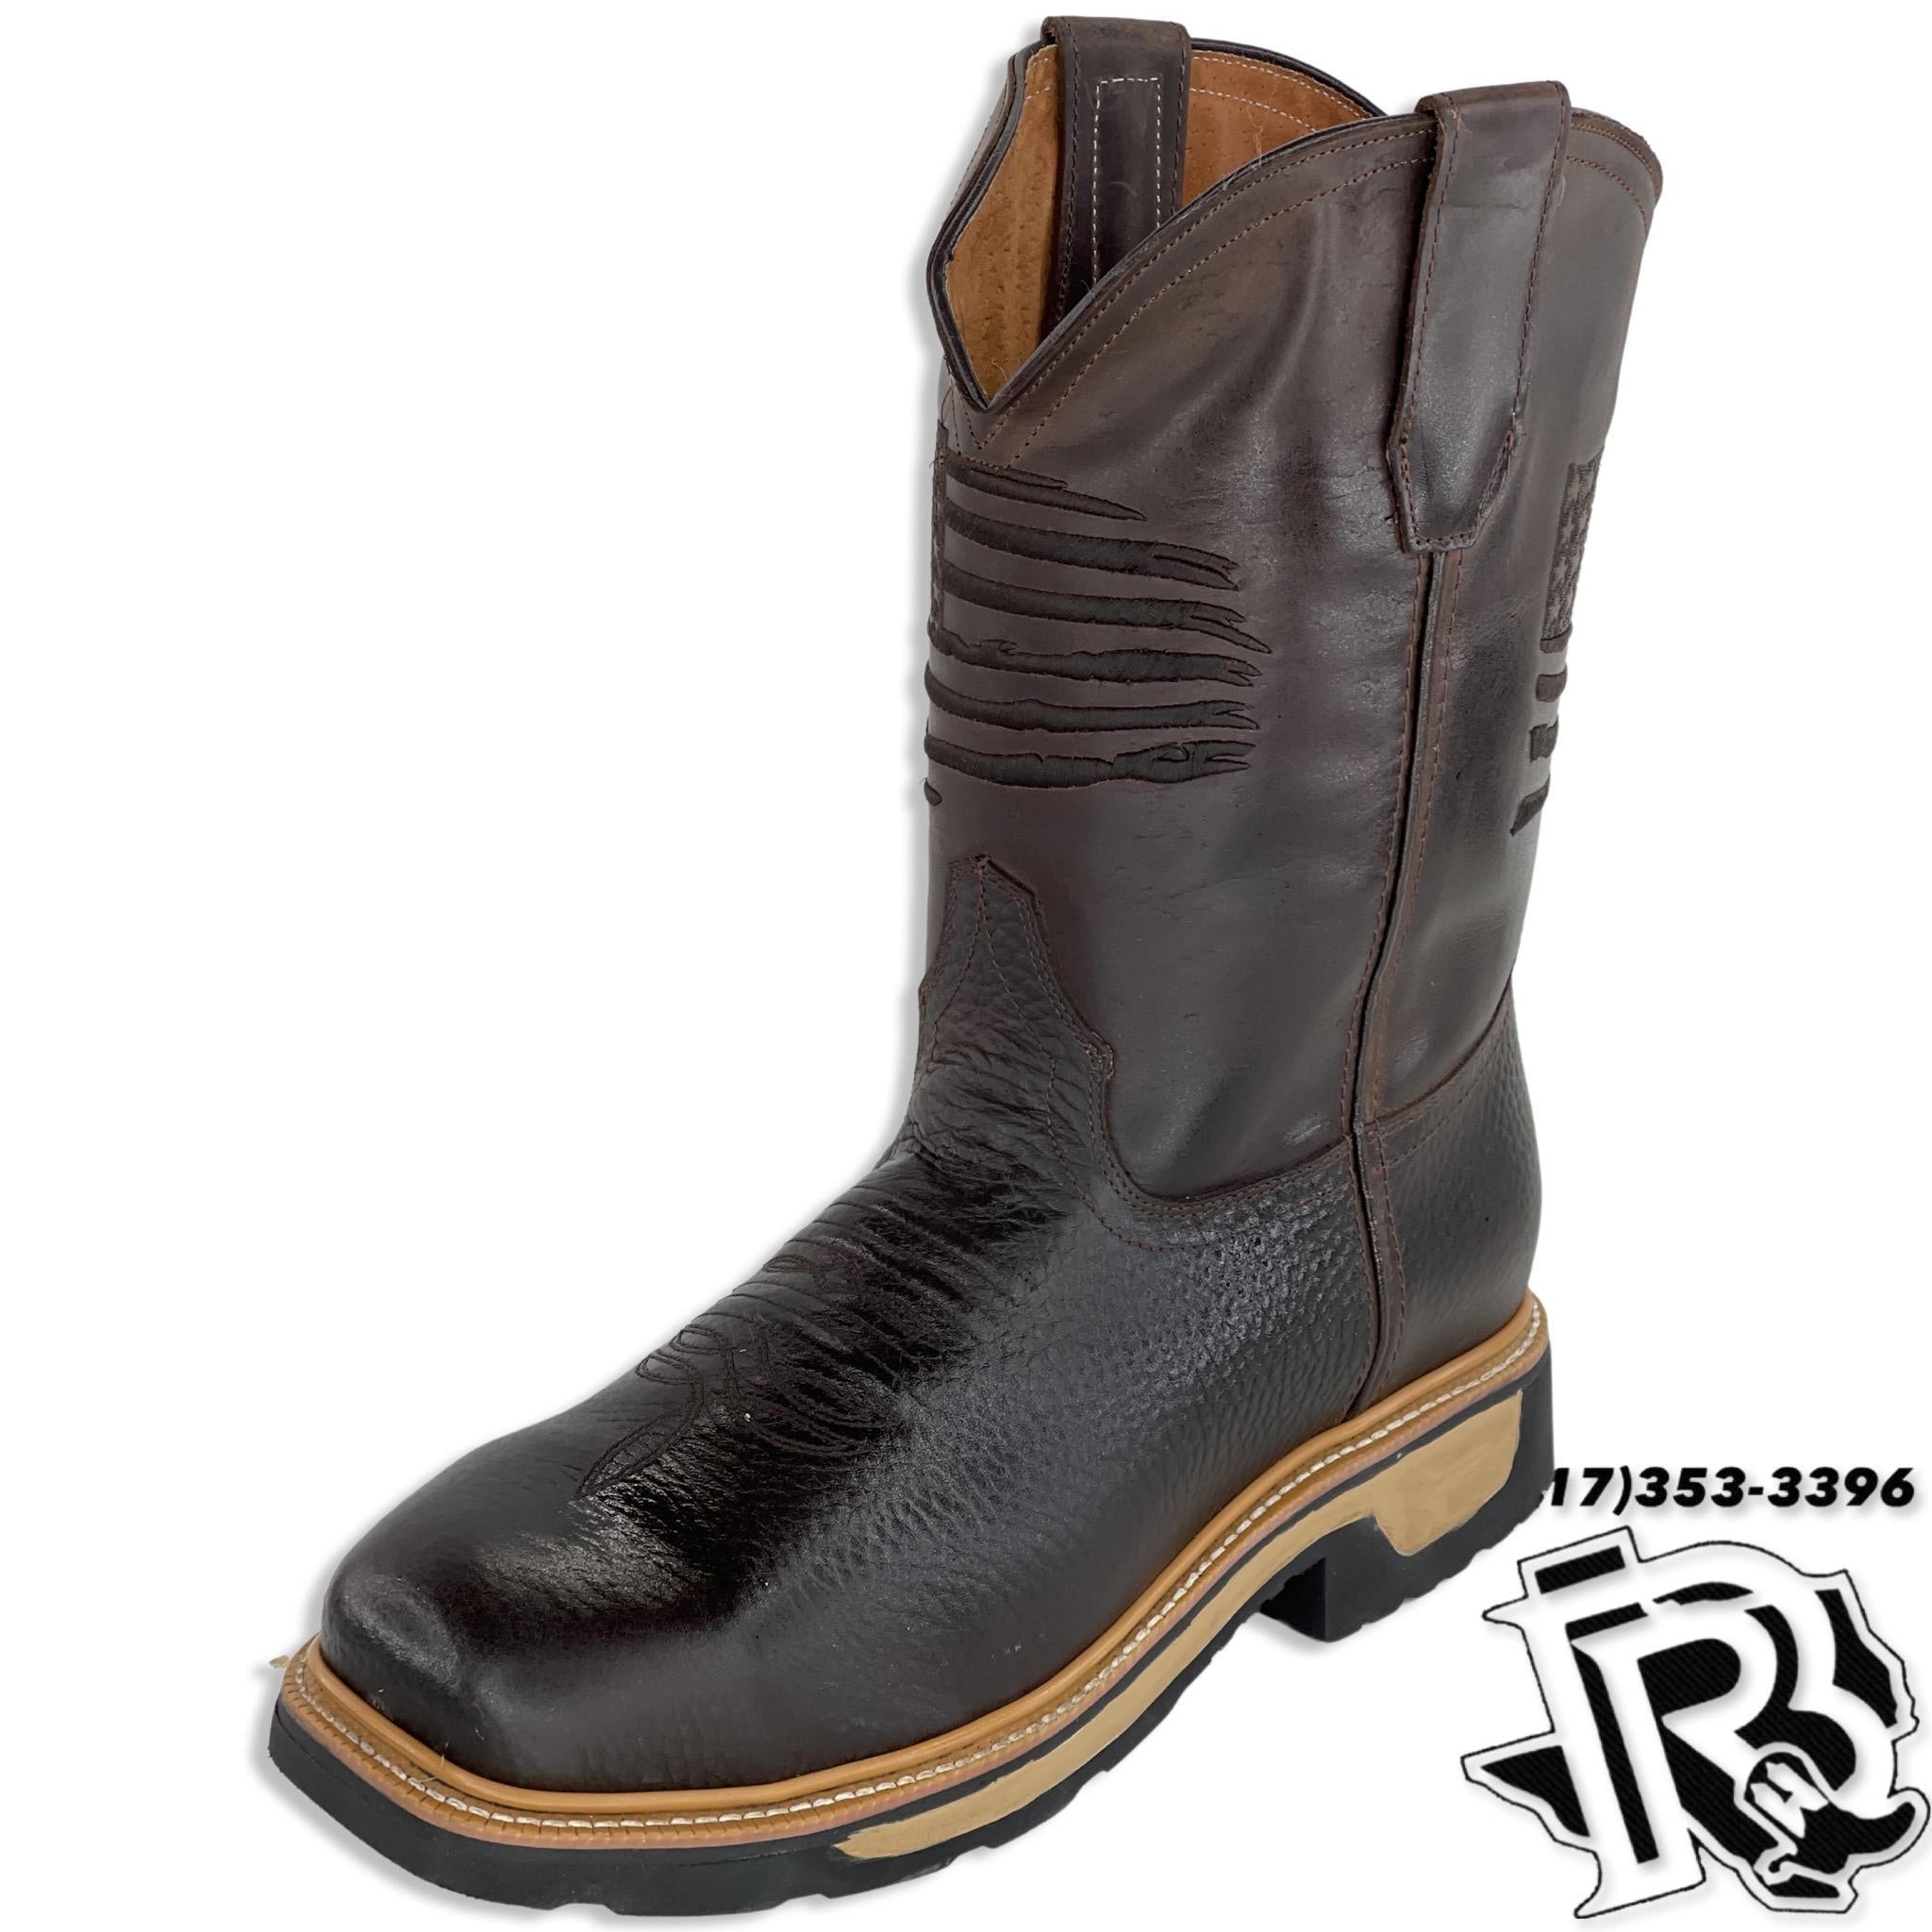 NO STEEL TOE | MEN SQUARE TOE WORK BOOT MEXICO FLAG STYLE #1006203